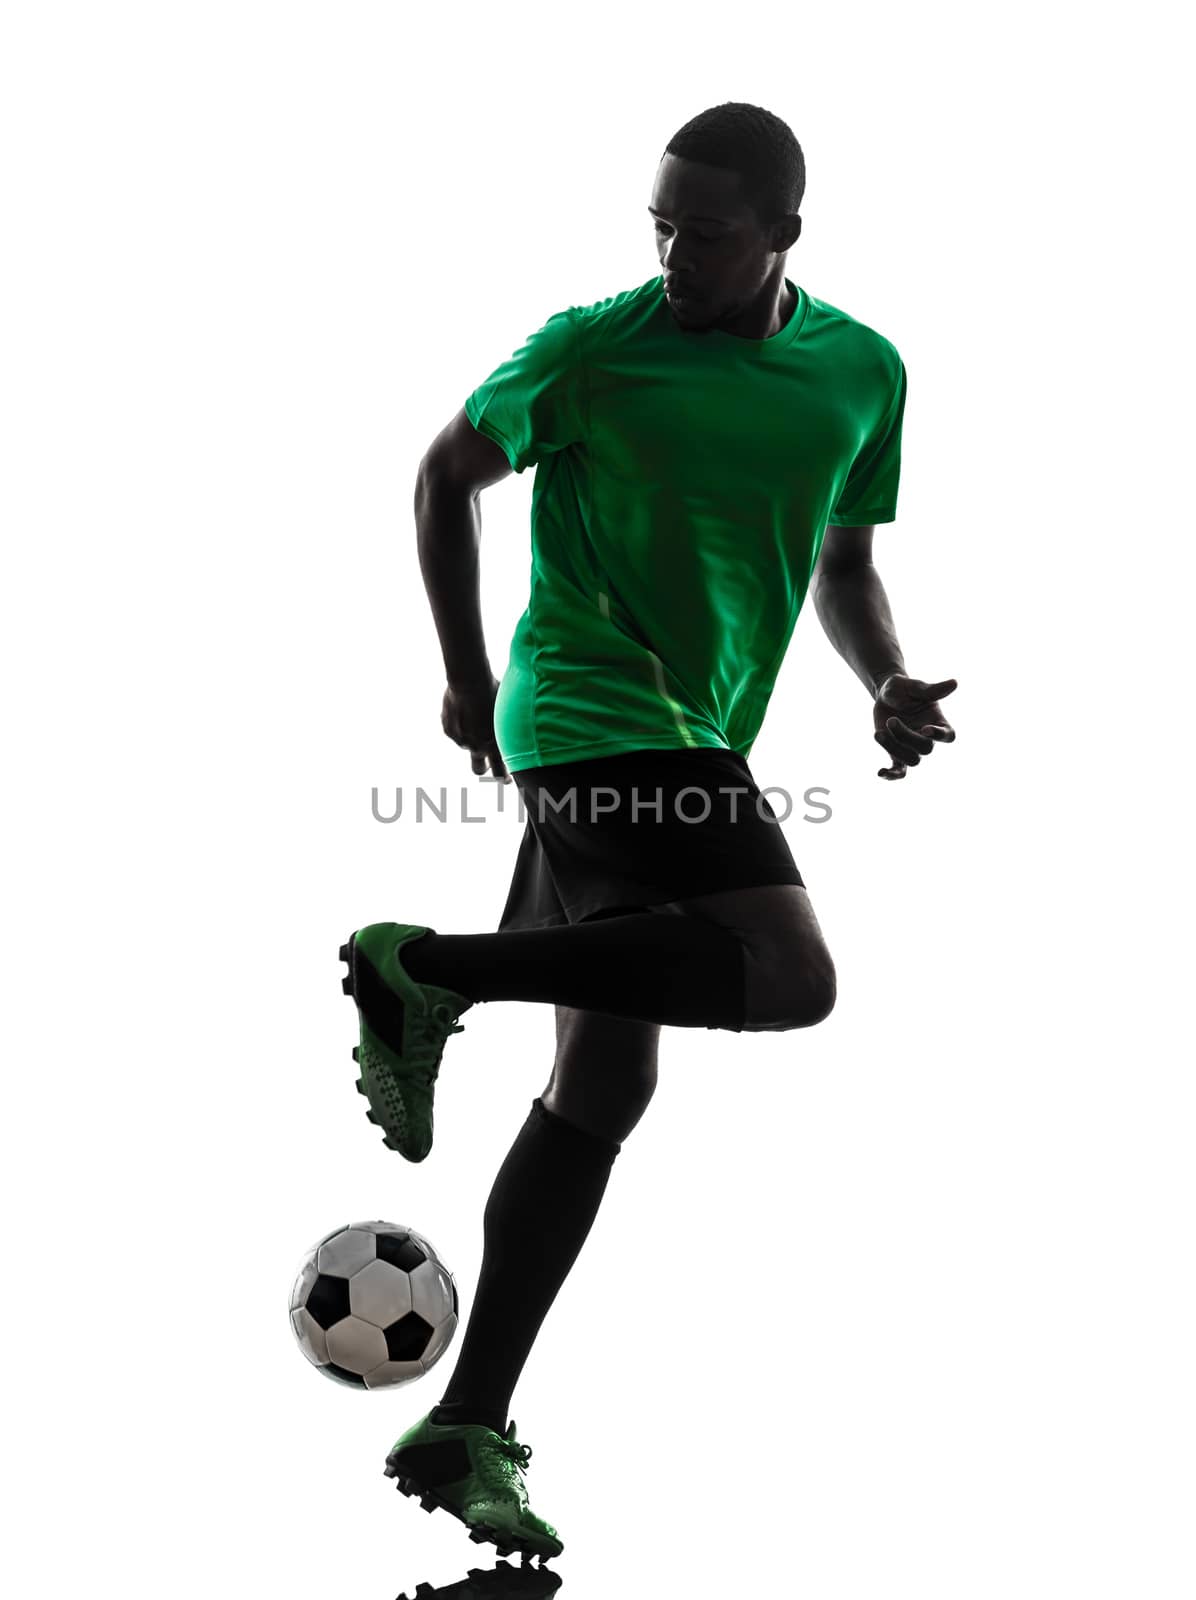 one african man soccer player green jersey in silhouette  on white background